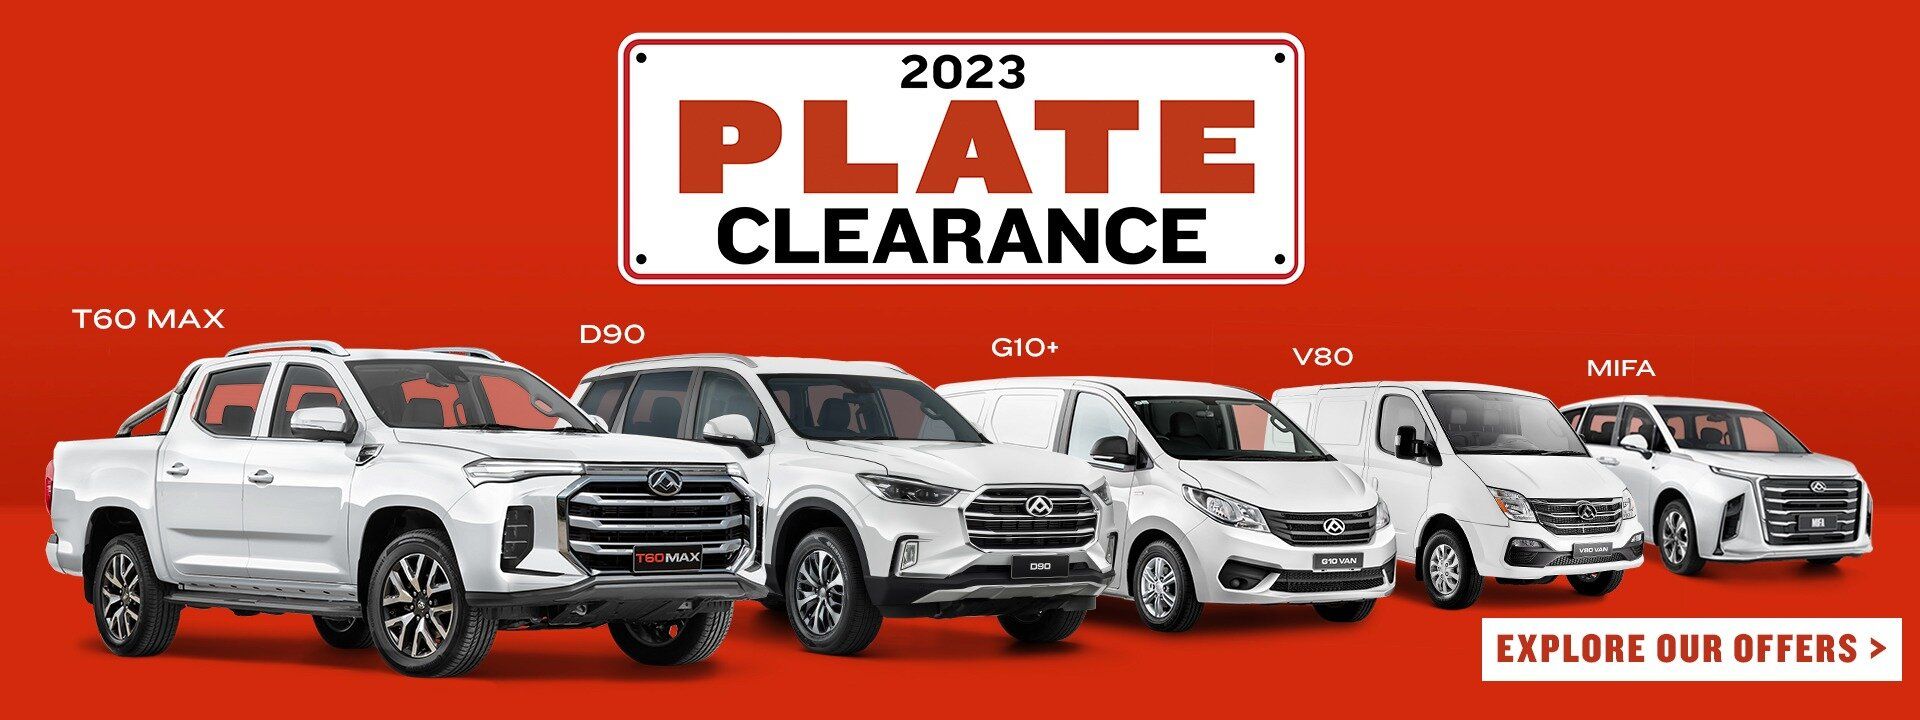 2023 Plate Clearance